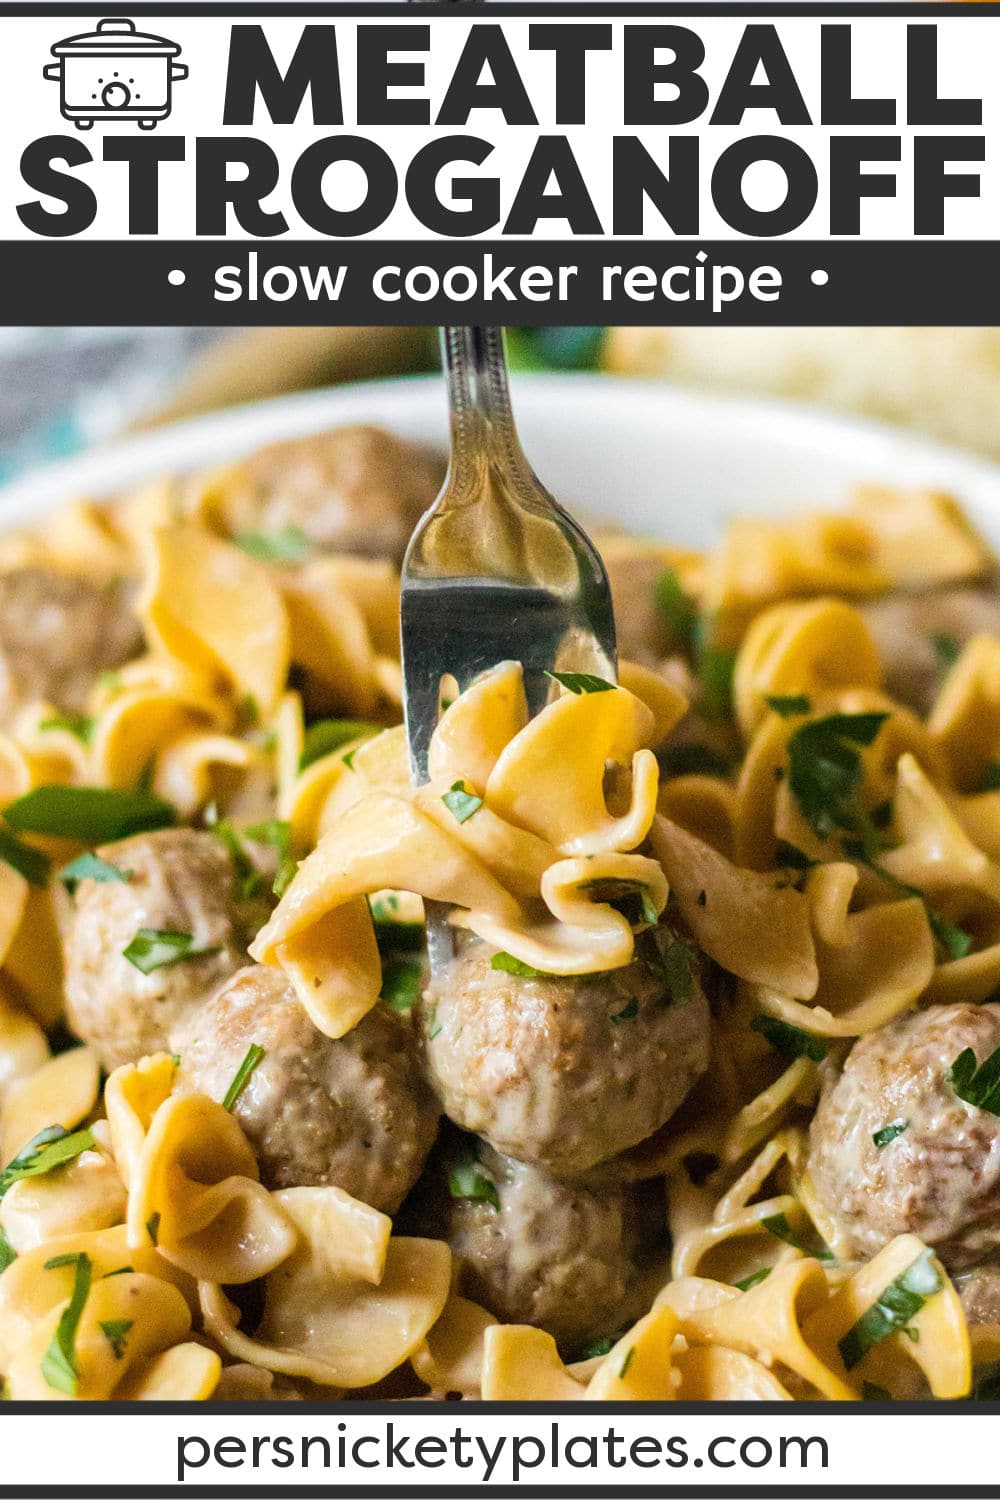 This easy slow cooker meatball stroganoff combines tender meatballs, cream of mushroom soup, sour cream, and a few other simple ingredients in a rich, creamy sauce served over egg noodles for all the classic flavors we love. Comfort food made easy in the crockpot! | www.persnicketyplates.com